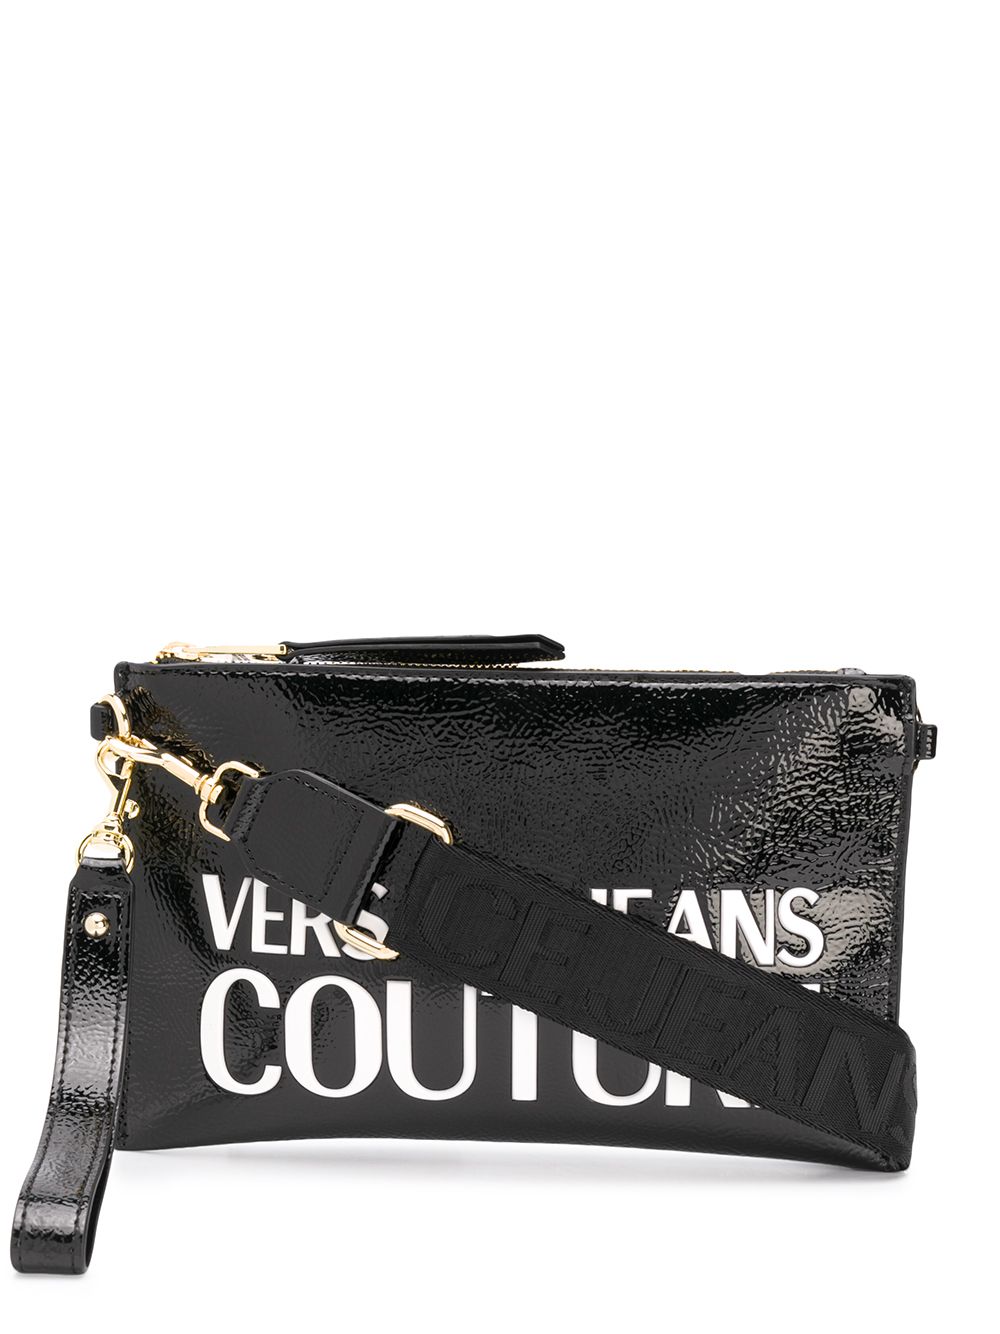 VERSACE JEANS COUTURE LOGO EMBOSSED CLUTCH BAG